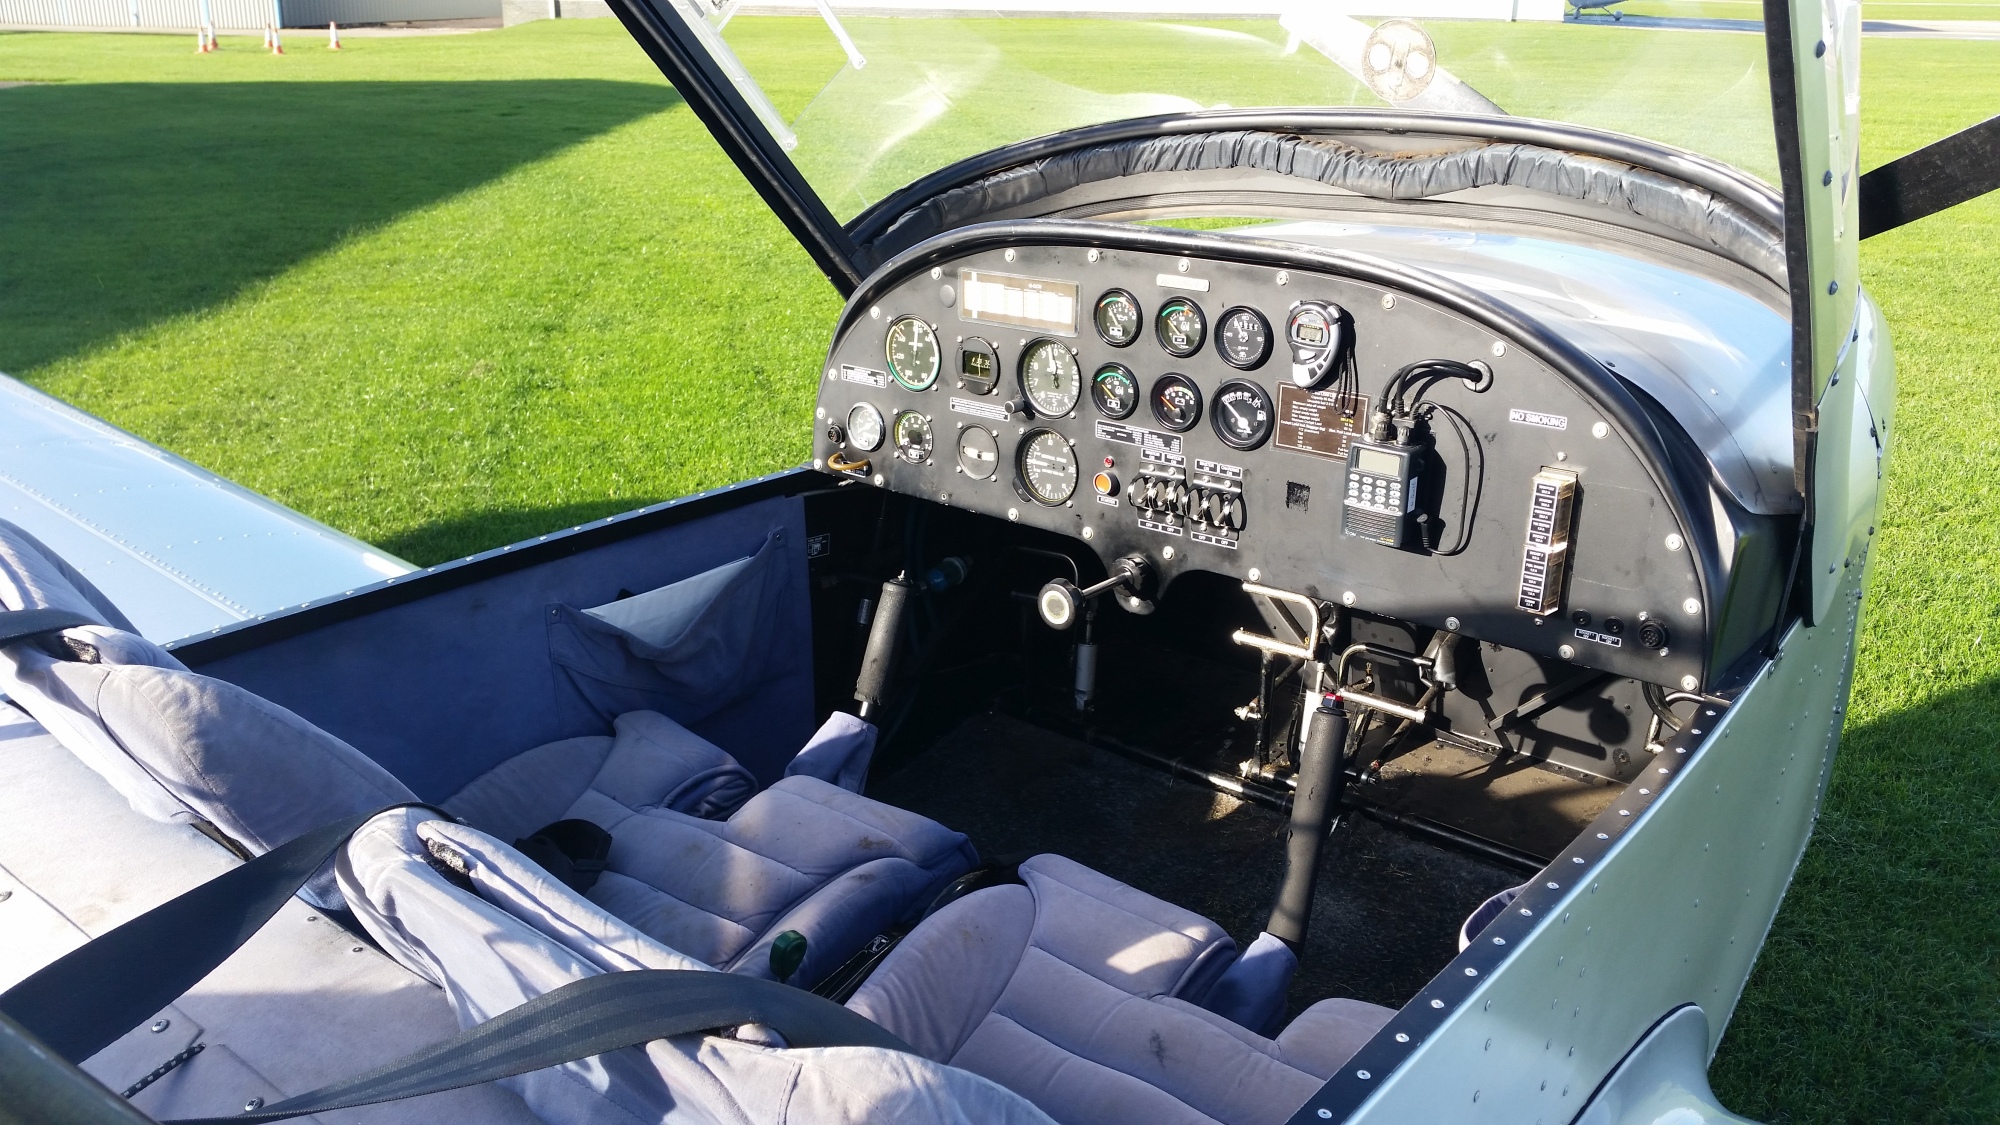 Inside the cockpit of the microlight